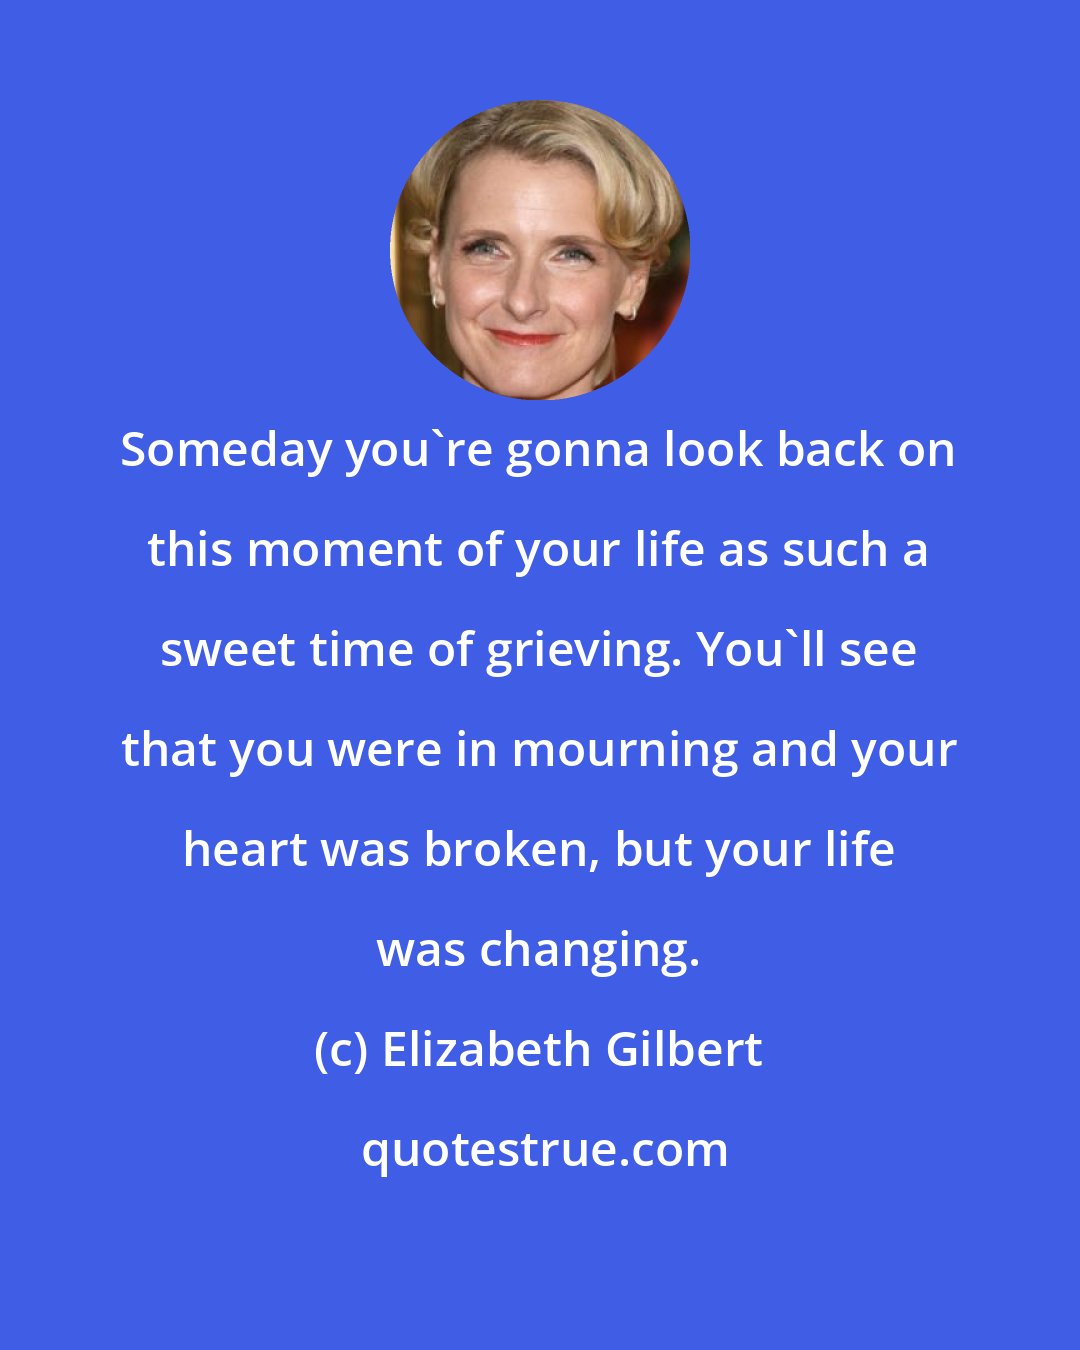 Elizabeth Gilbert: Someday you're gonna look back on this moment of your life as such a sweet time of grieving. You'll see that you were in mourning and your heart was broken, but your life was changing.